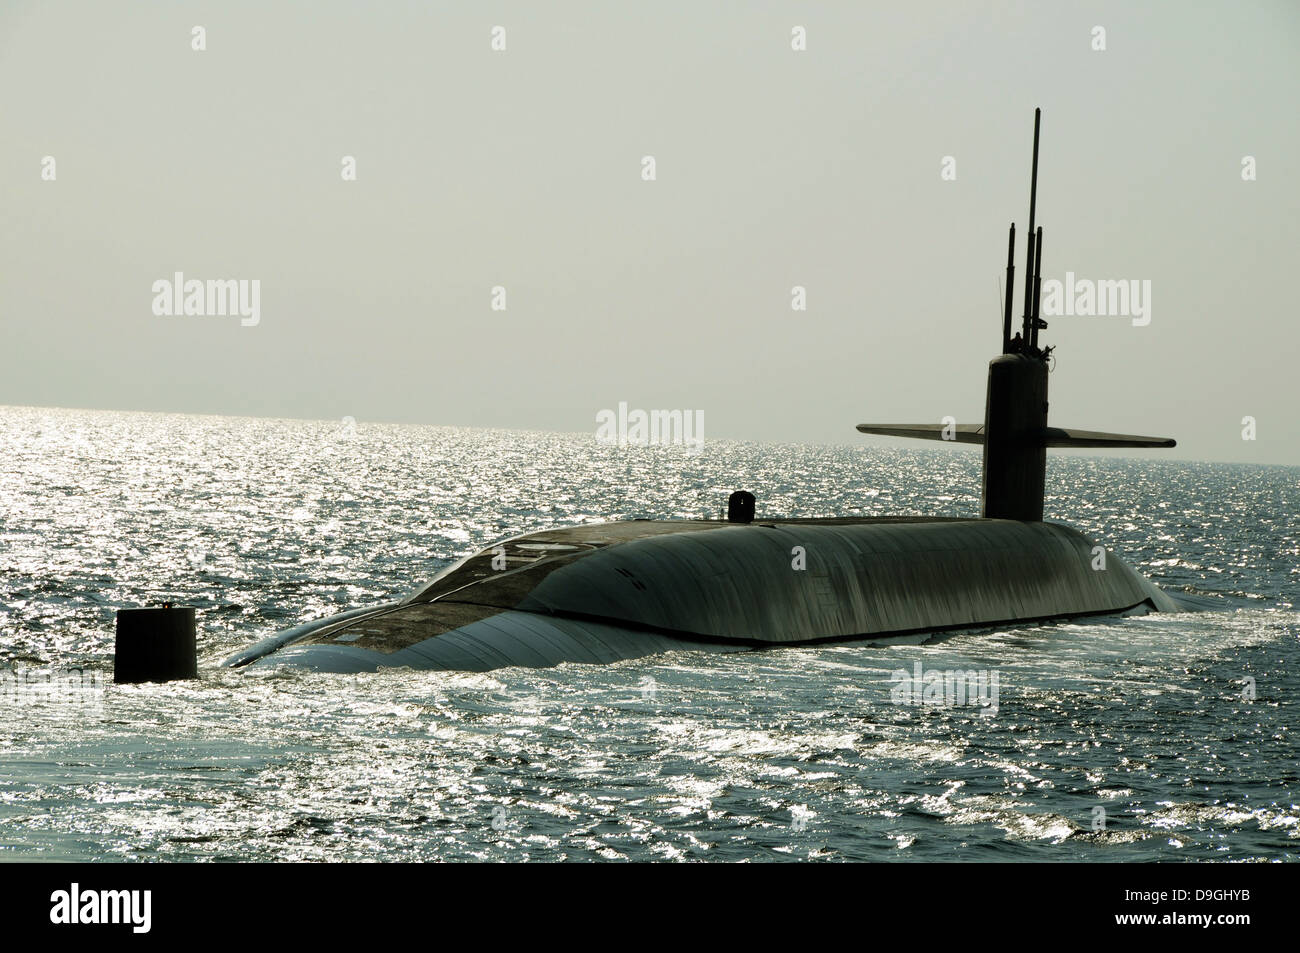 Il missile balistico sommergibile USS Maryland. Foto Stock